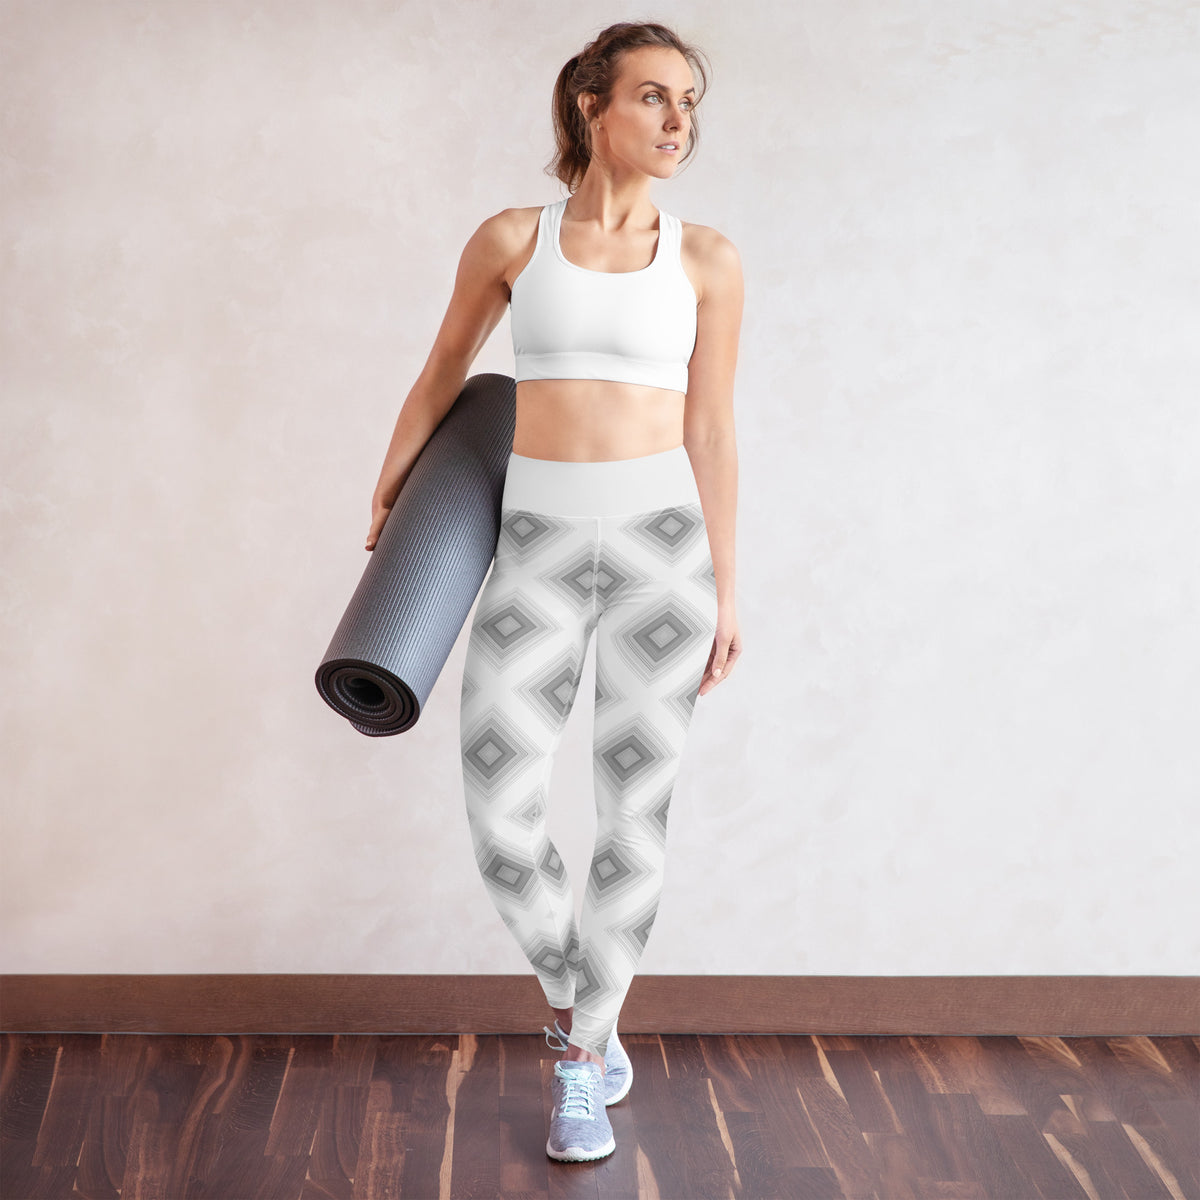 Tribal-patterned yoga leggings for a stylish workout.